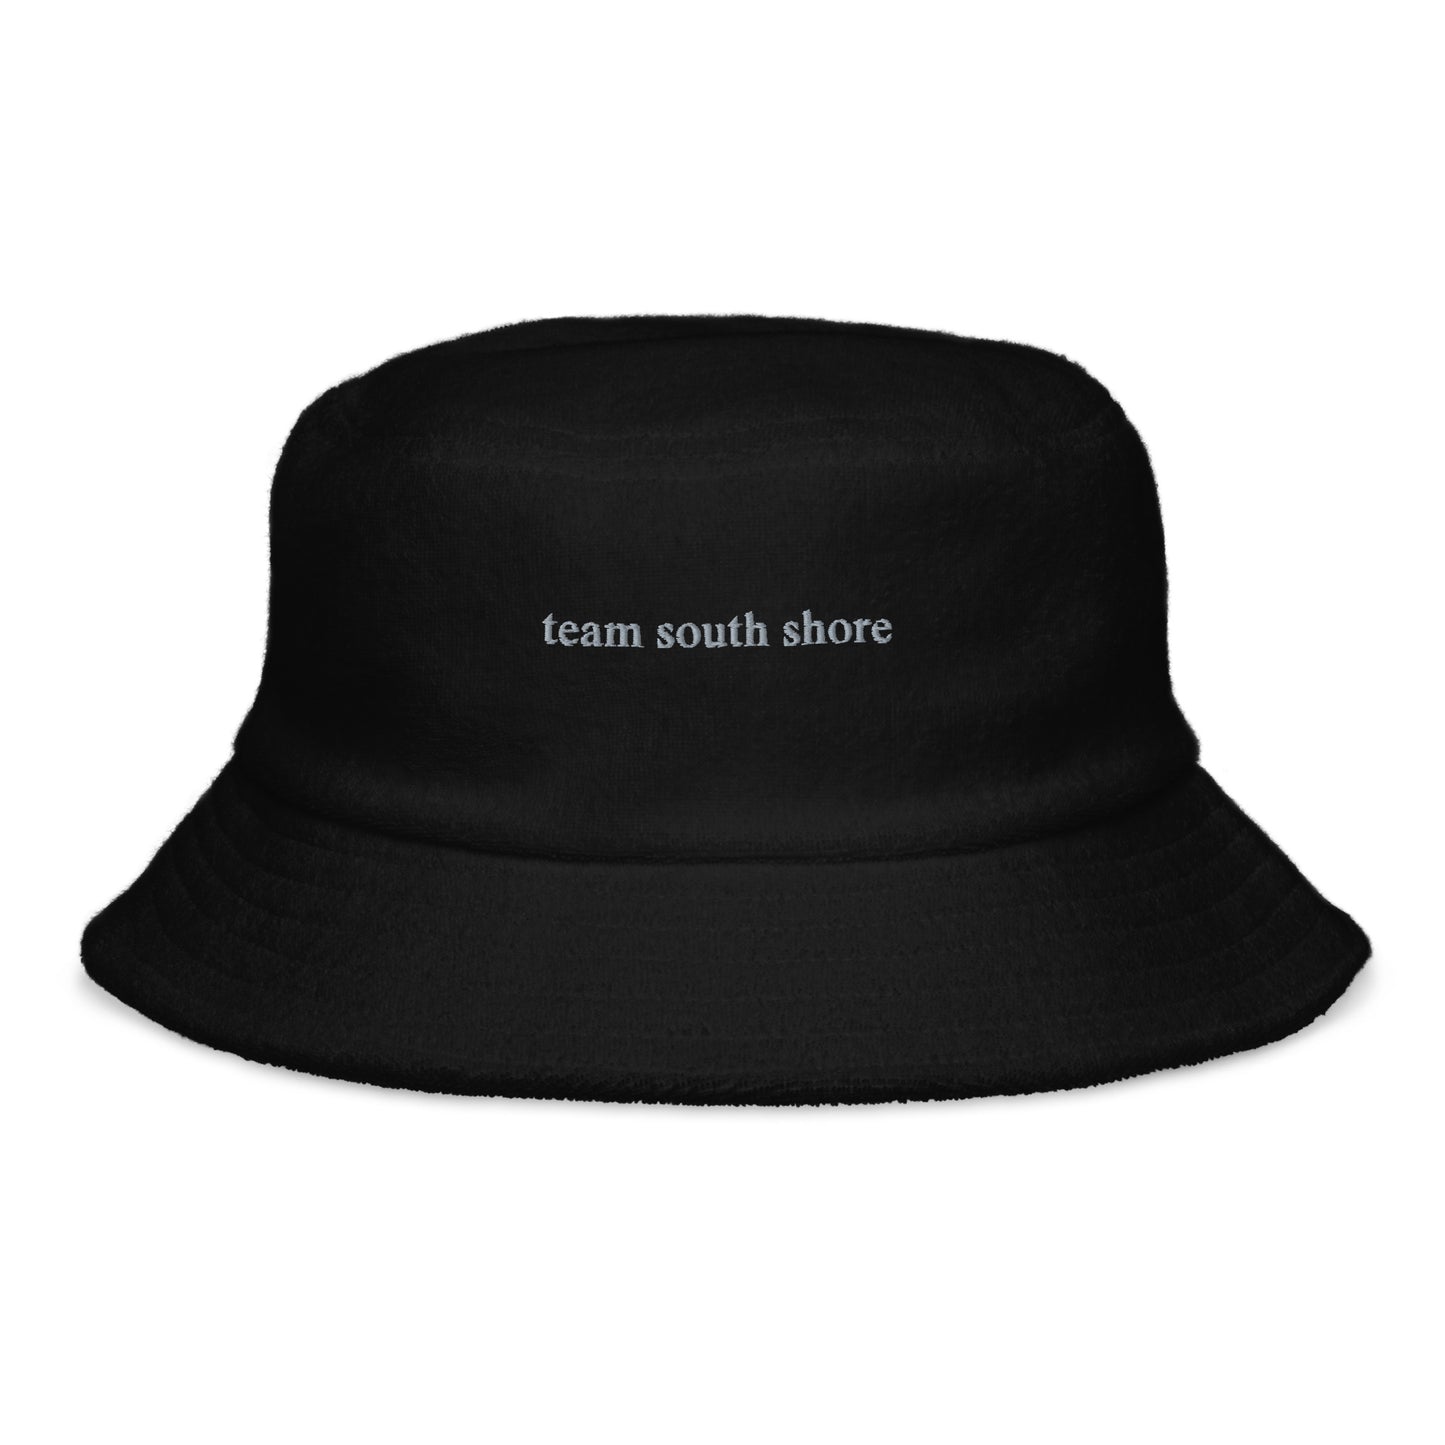 black bucket hat that says "team south shore" in grey lettering